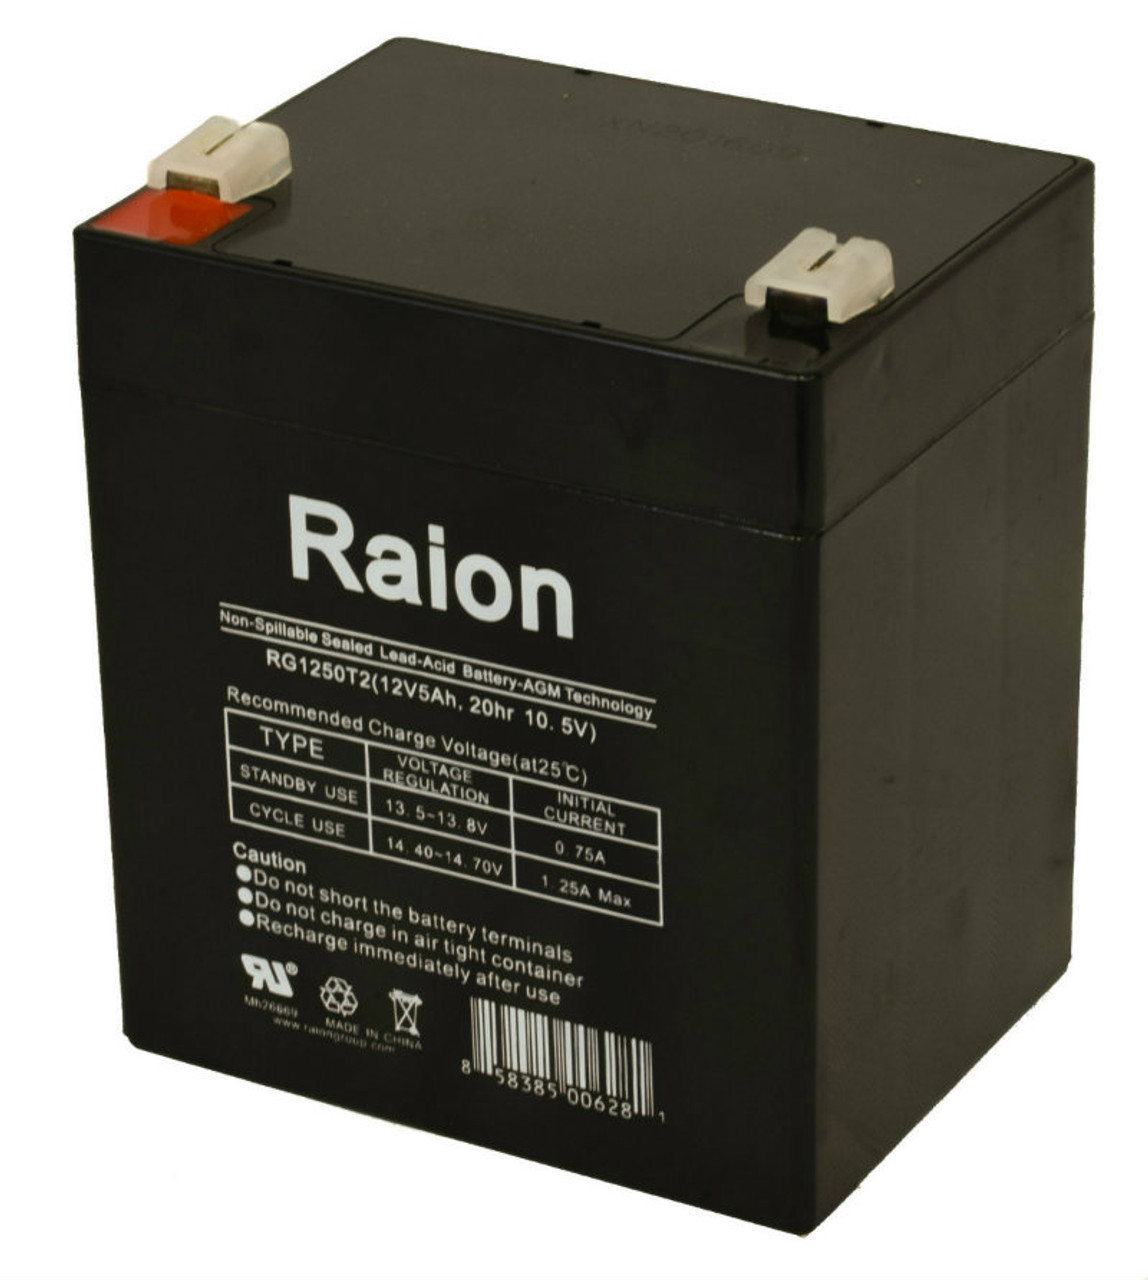 Raion Power RG1250T1 Replacement Battery for Duramp NP4-12 F1